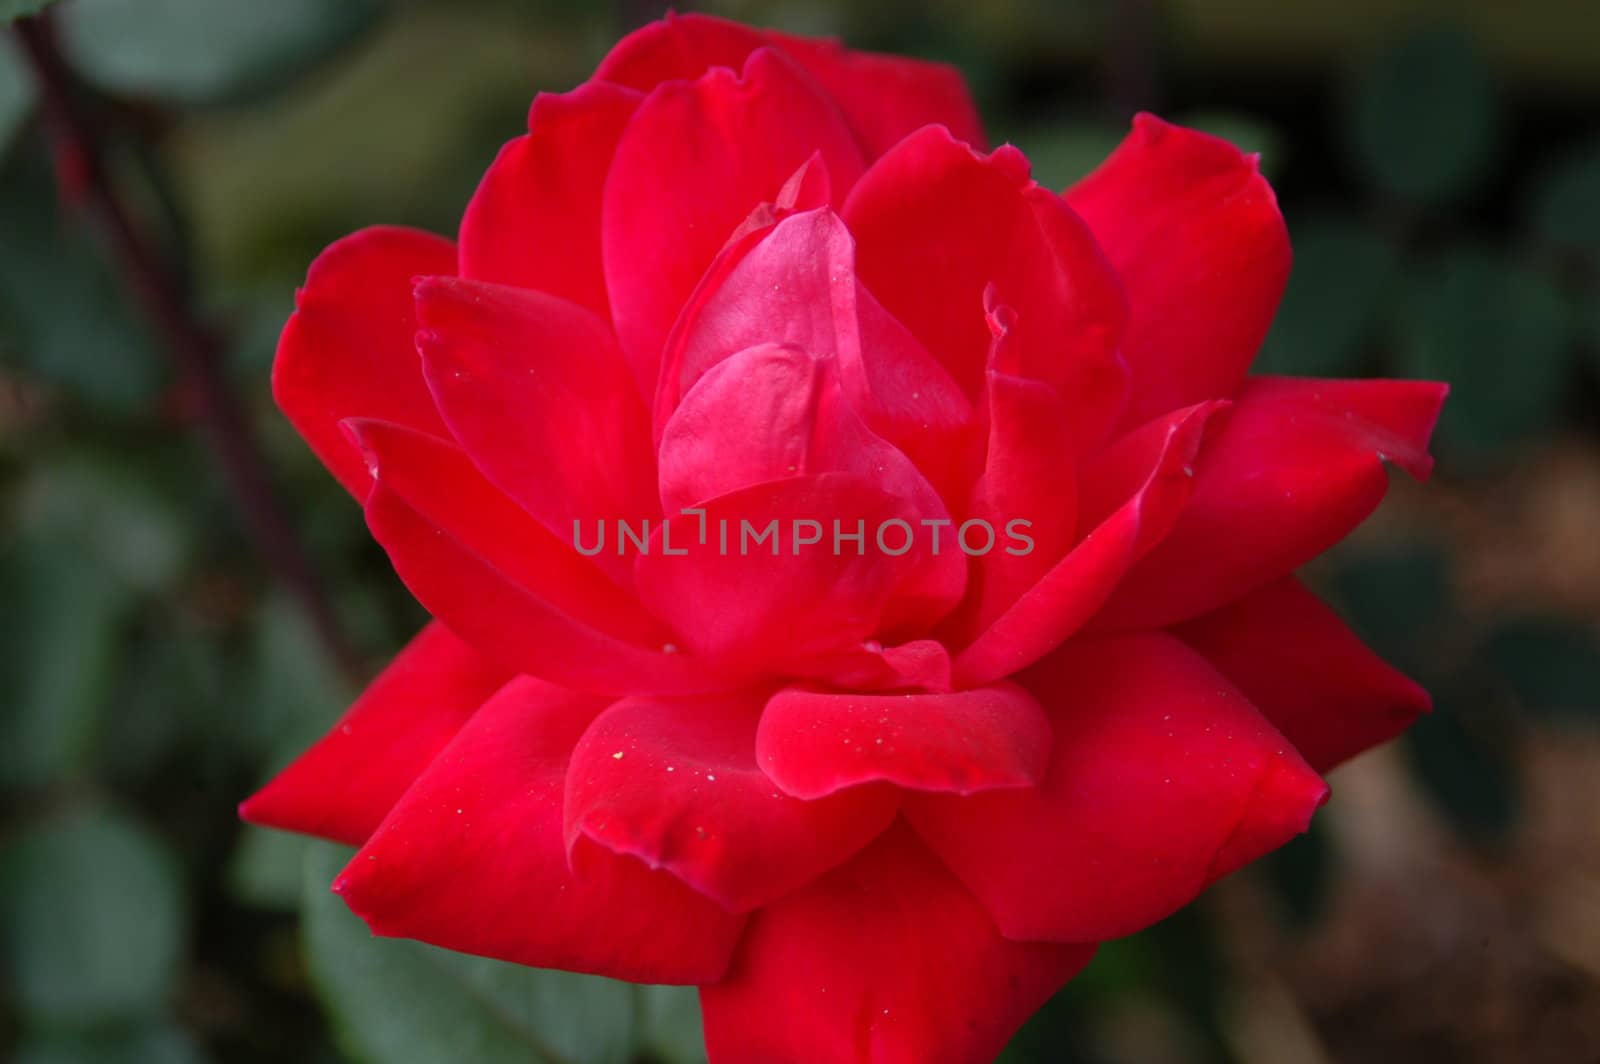 A closeup view of a red rose